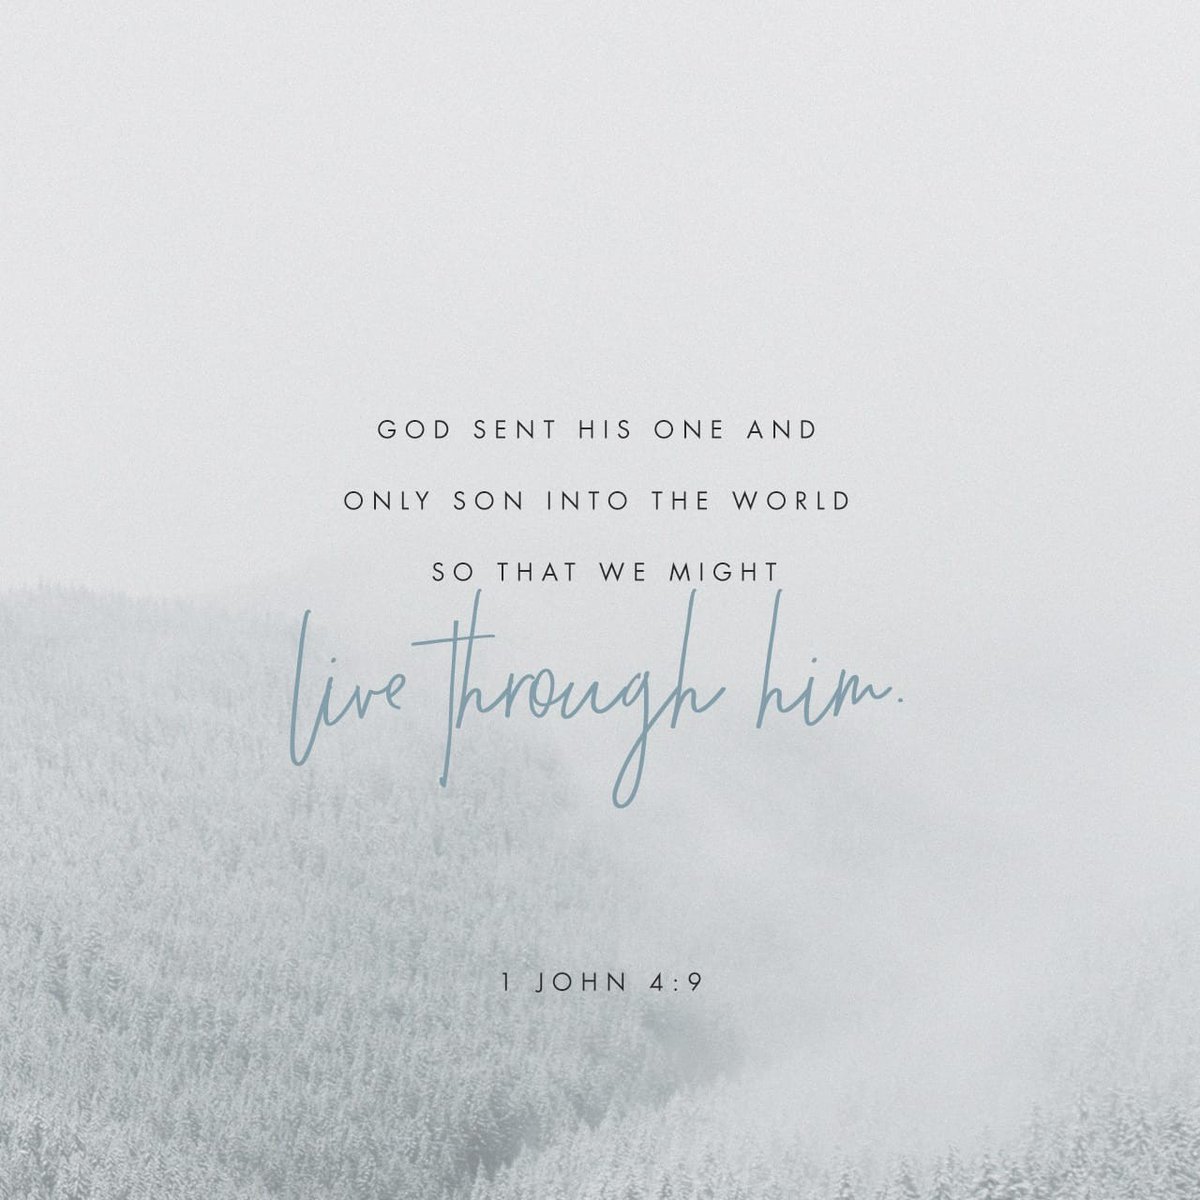 1 John 4:9 NASB By this the love of God was manifested in us, that God has sent His only begotten Son into the world so that we might live through Him. #dailybread #dailyverse #scripture #bibleverse #bible #jesus